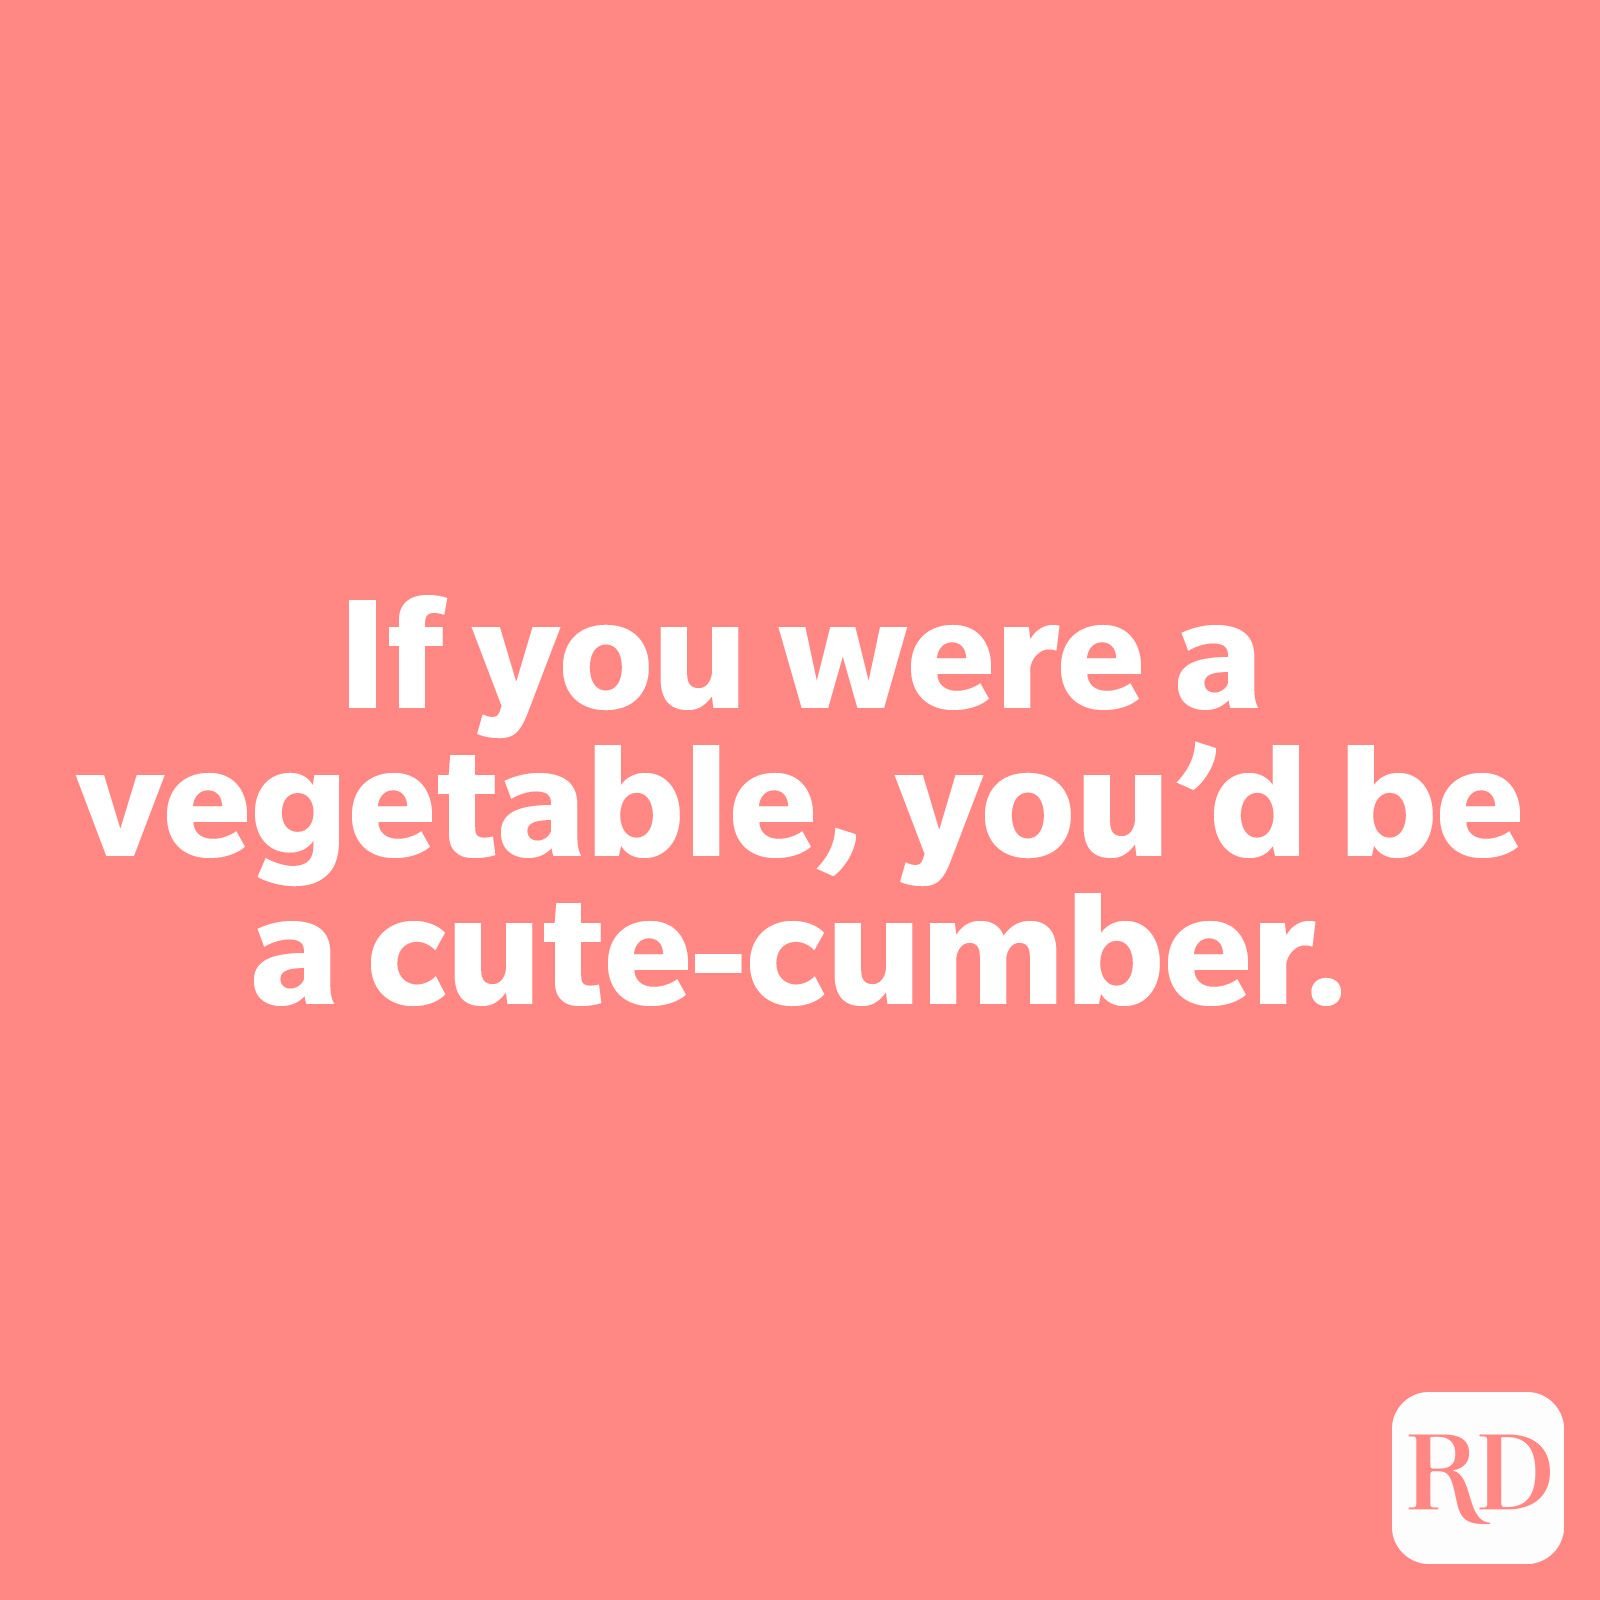 If you were a vegetable, you’d be a cute-cumber.